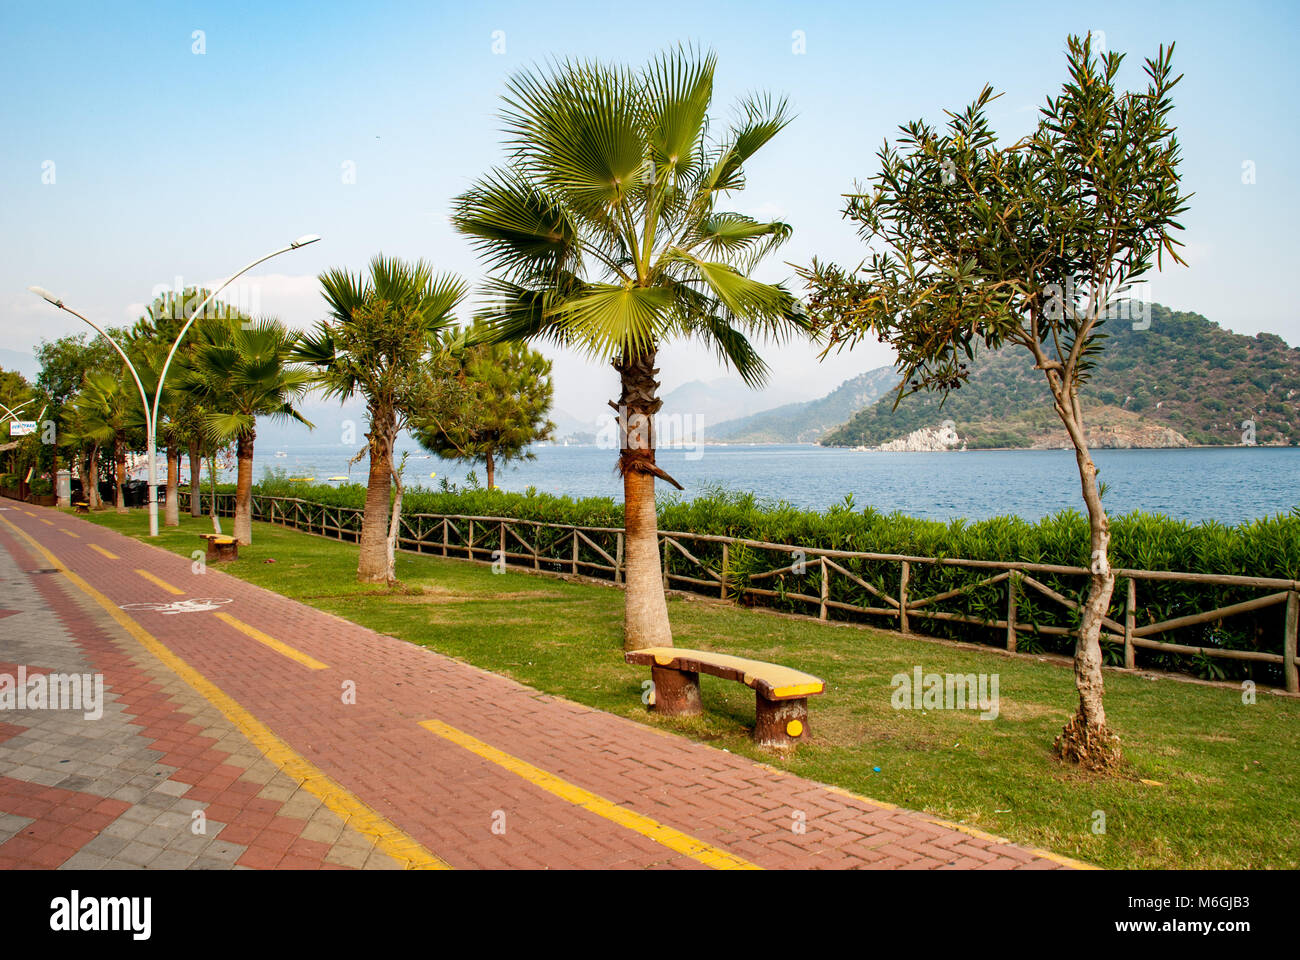 Seaside paved promenade with palm trees and an olive tree with a wooden bench, overlooking a calm sea against a backdrop of distant hills Stock Photo